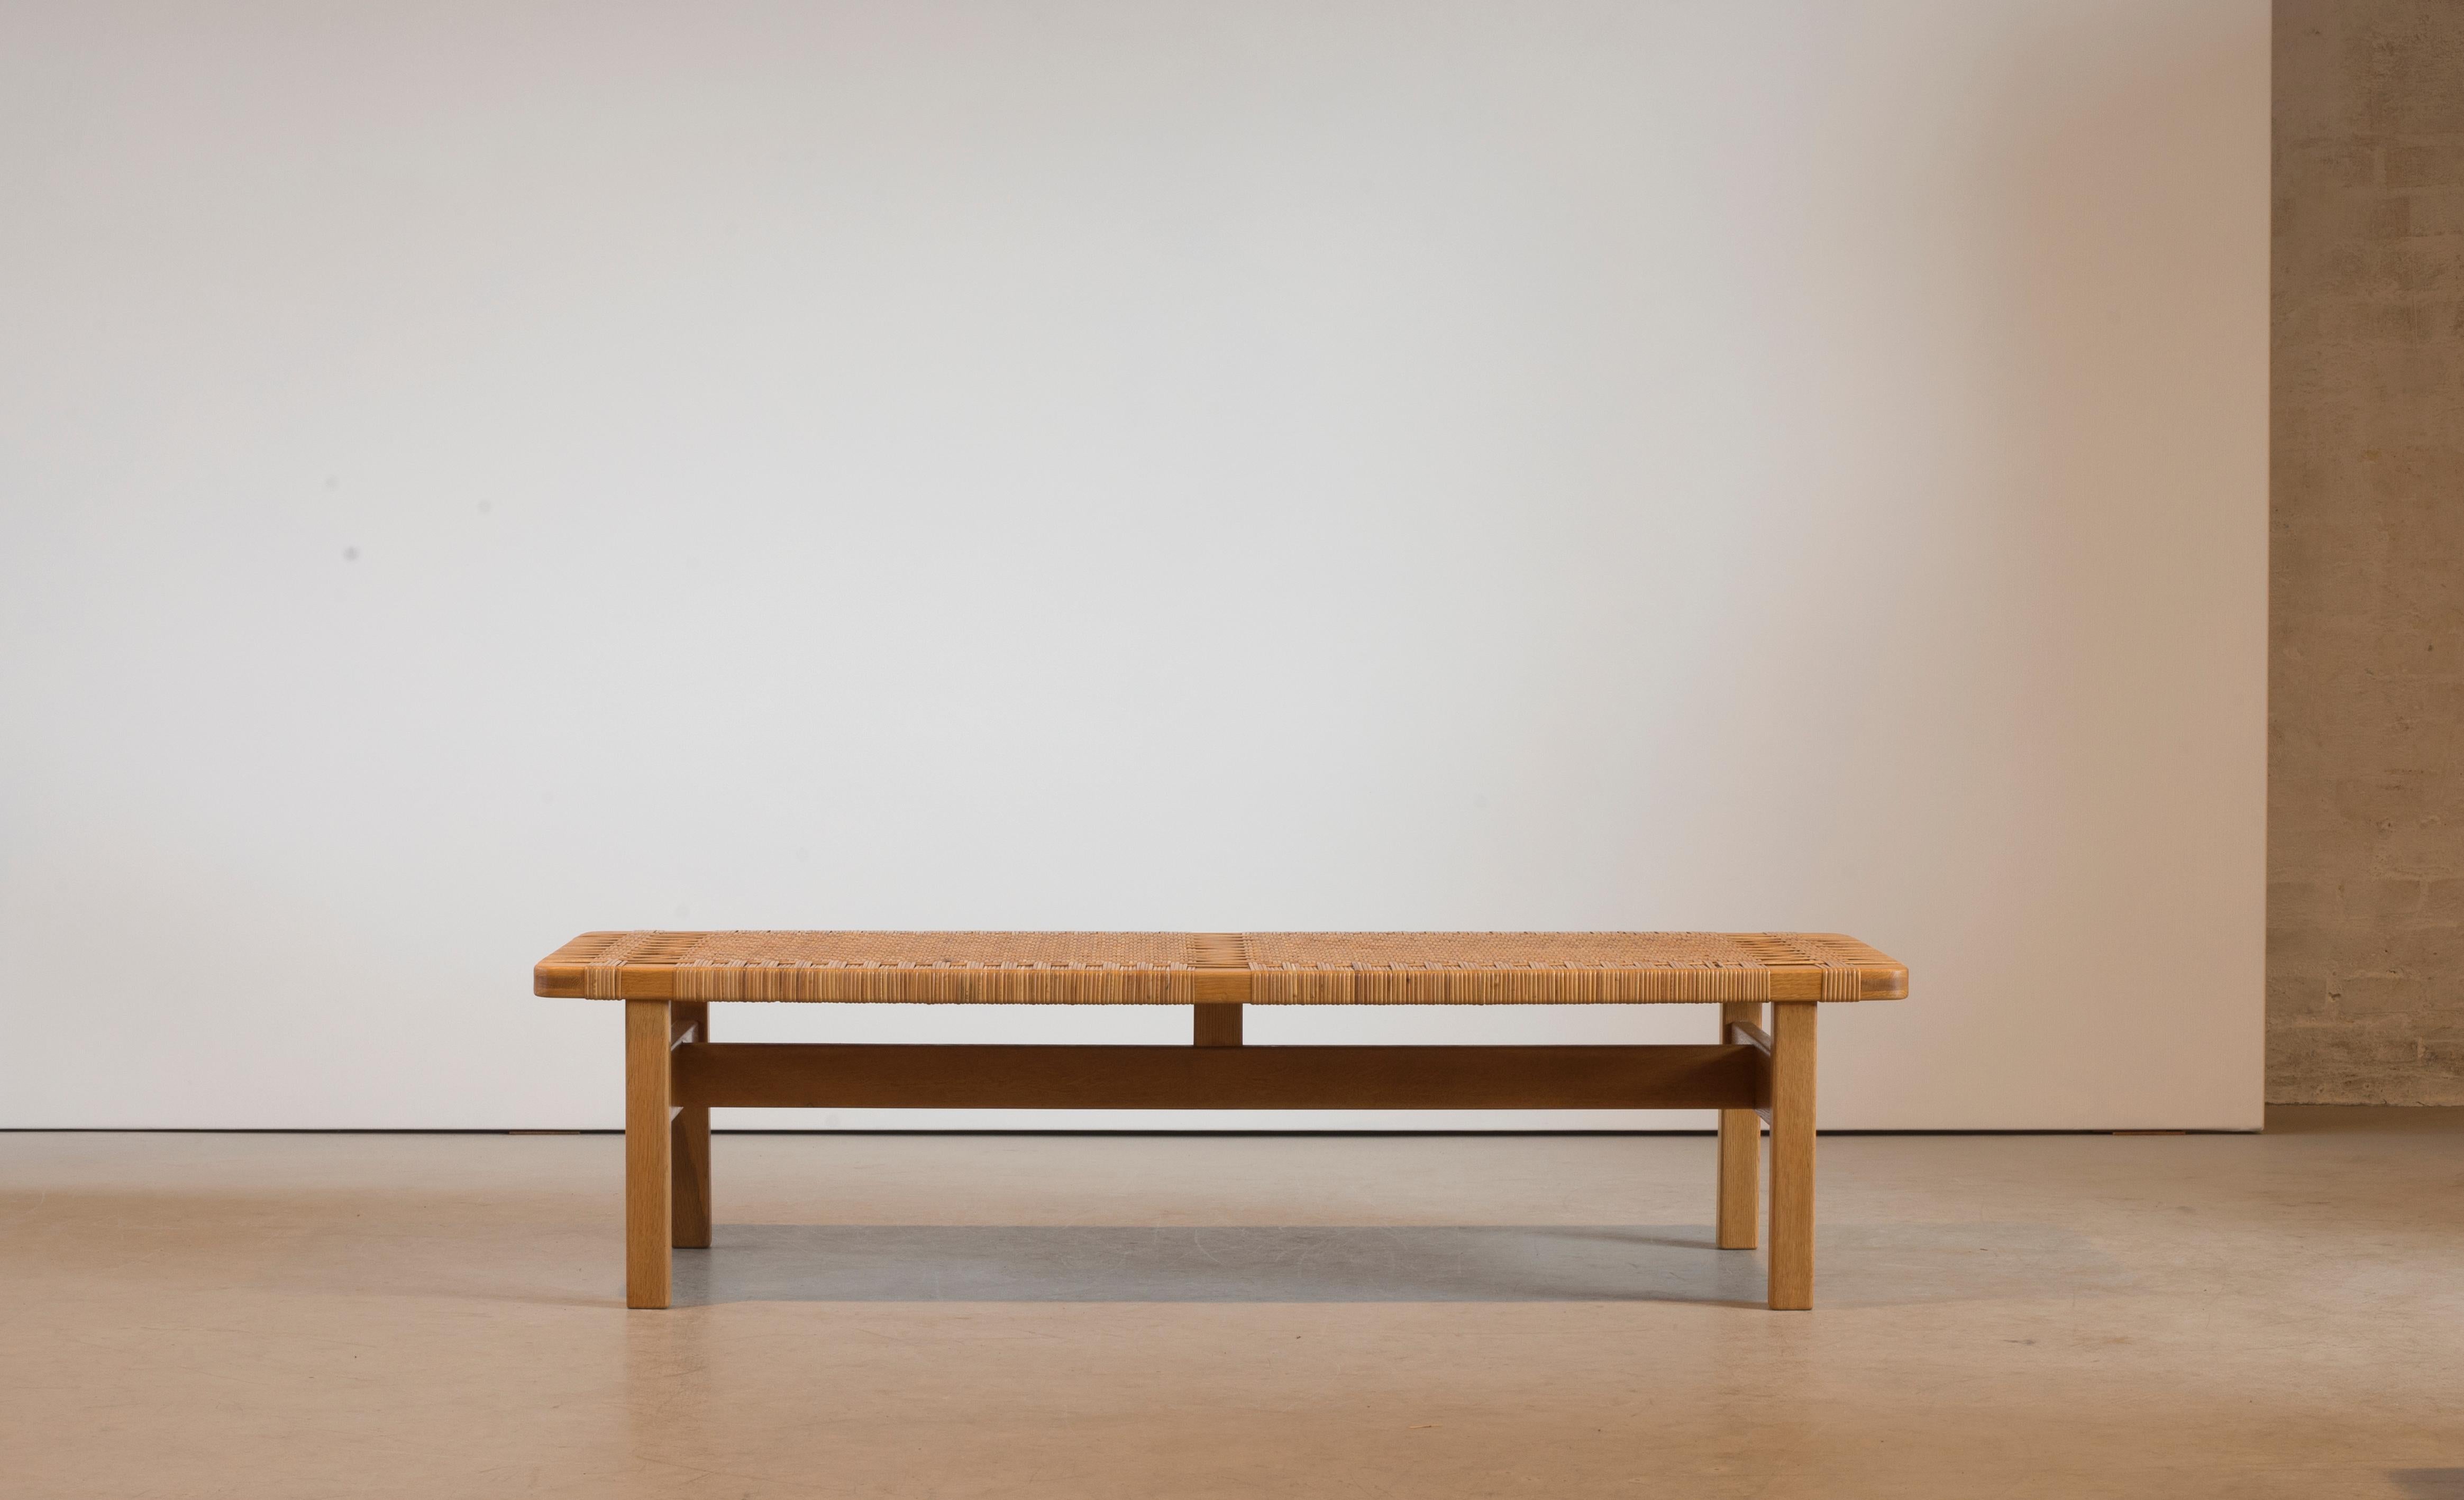 Børge Mogensen. An oak bench with top of woven cane. Manufactured by Fredericia Furniture.